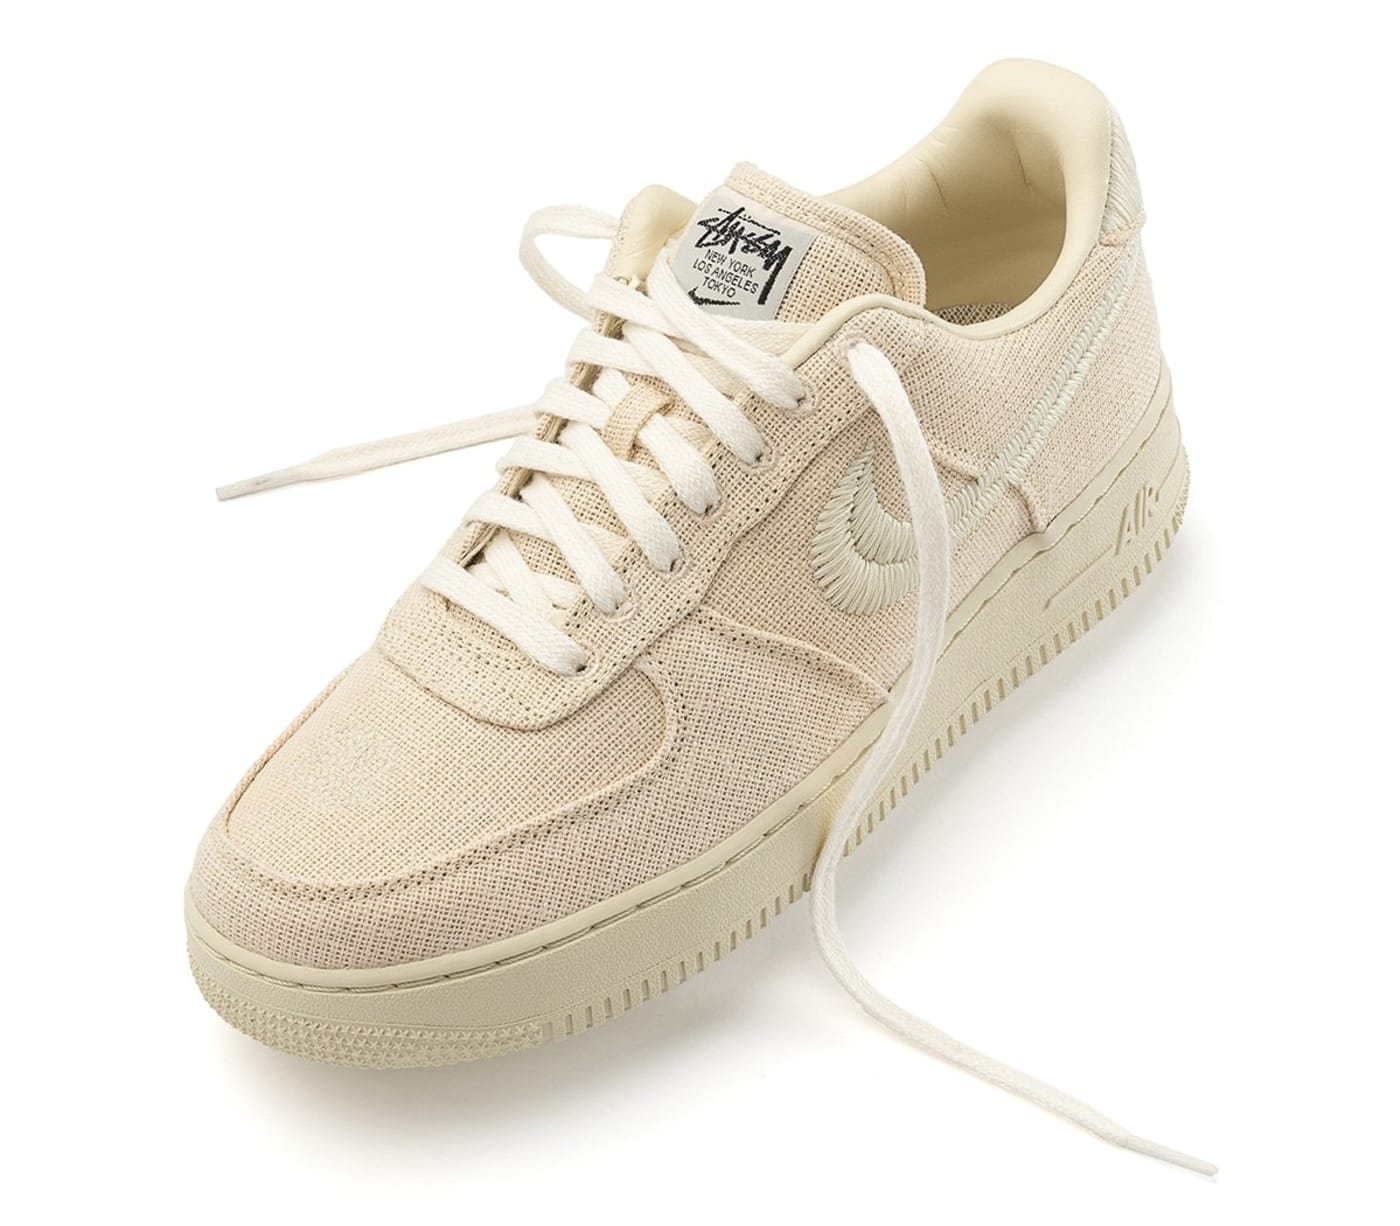 all air force 1 collabs